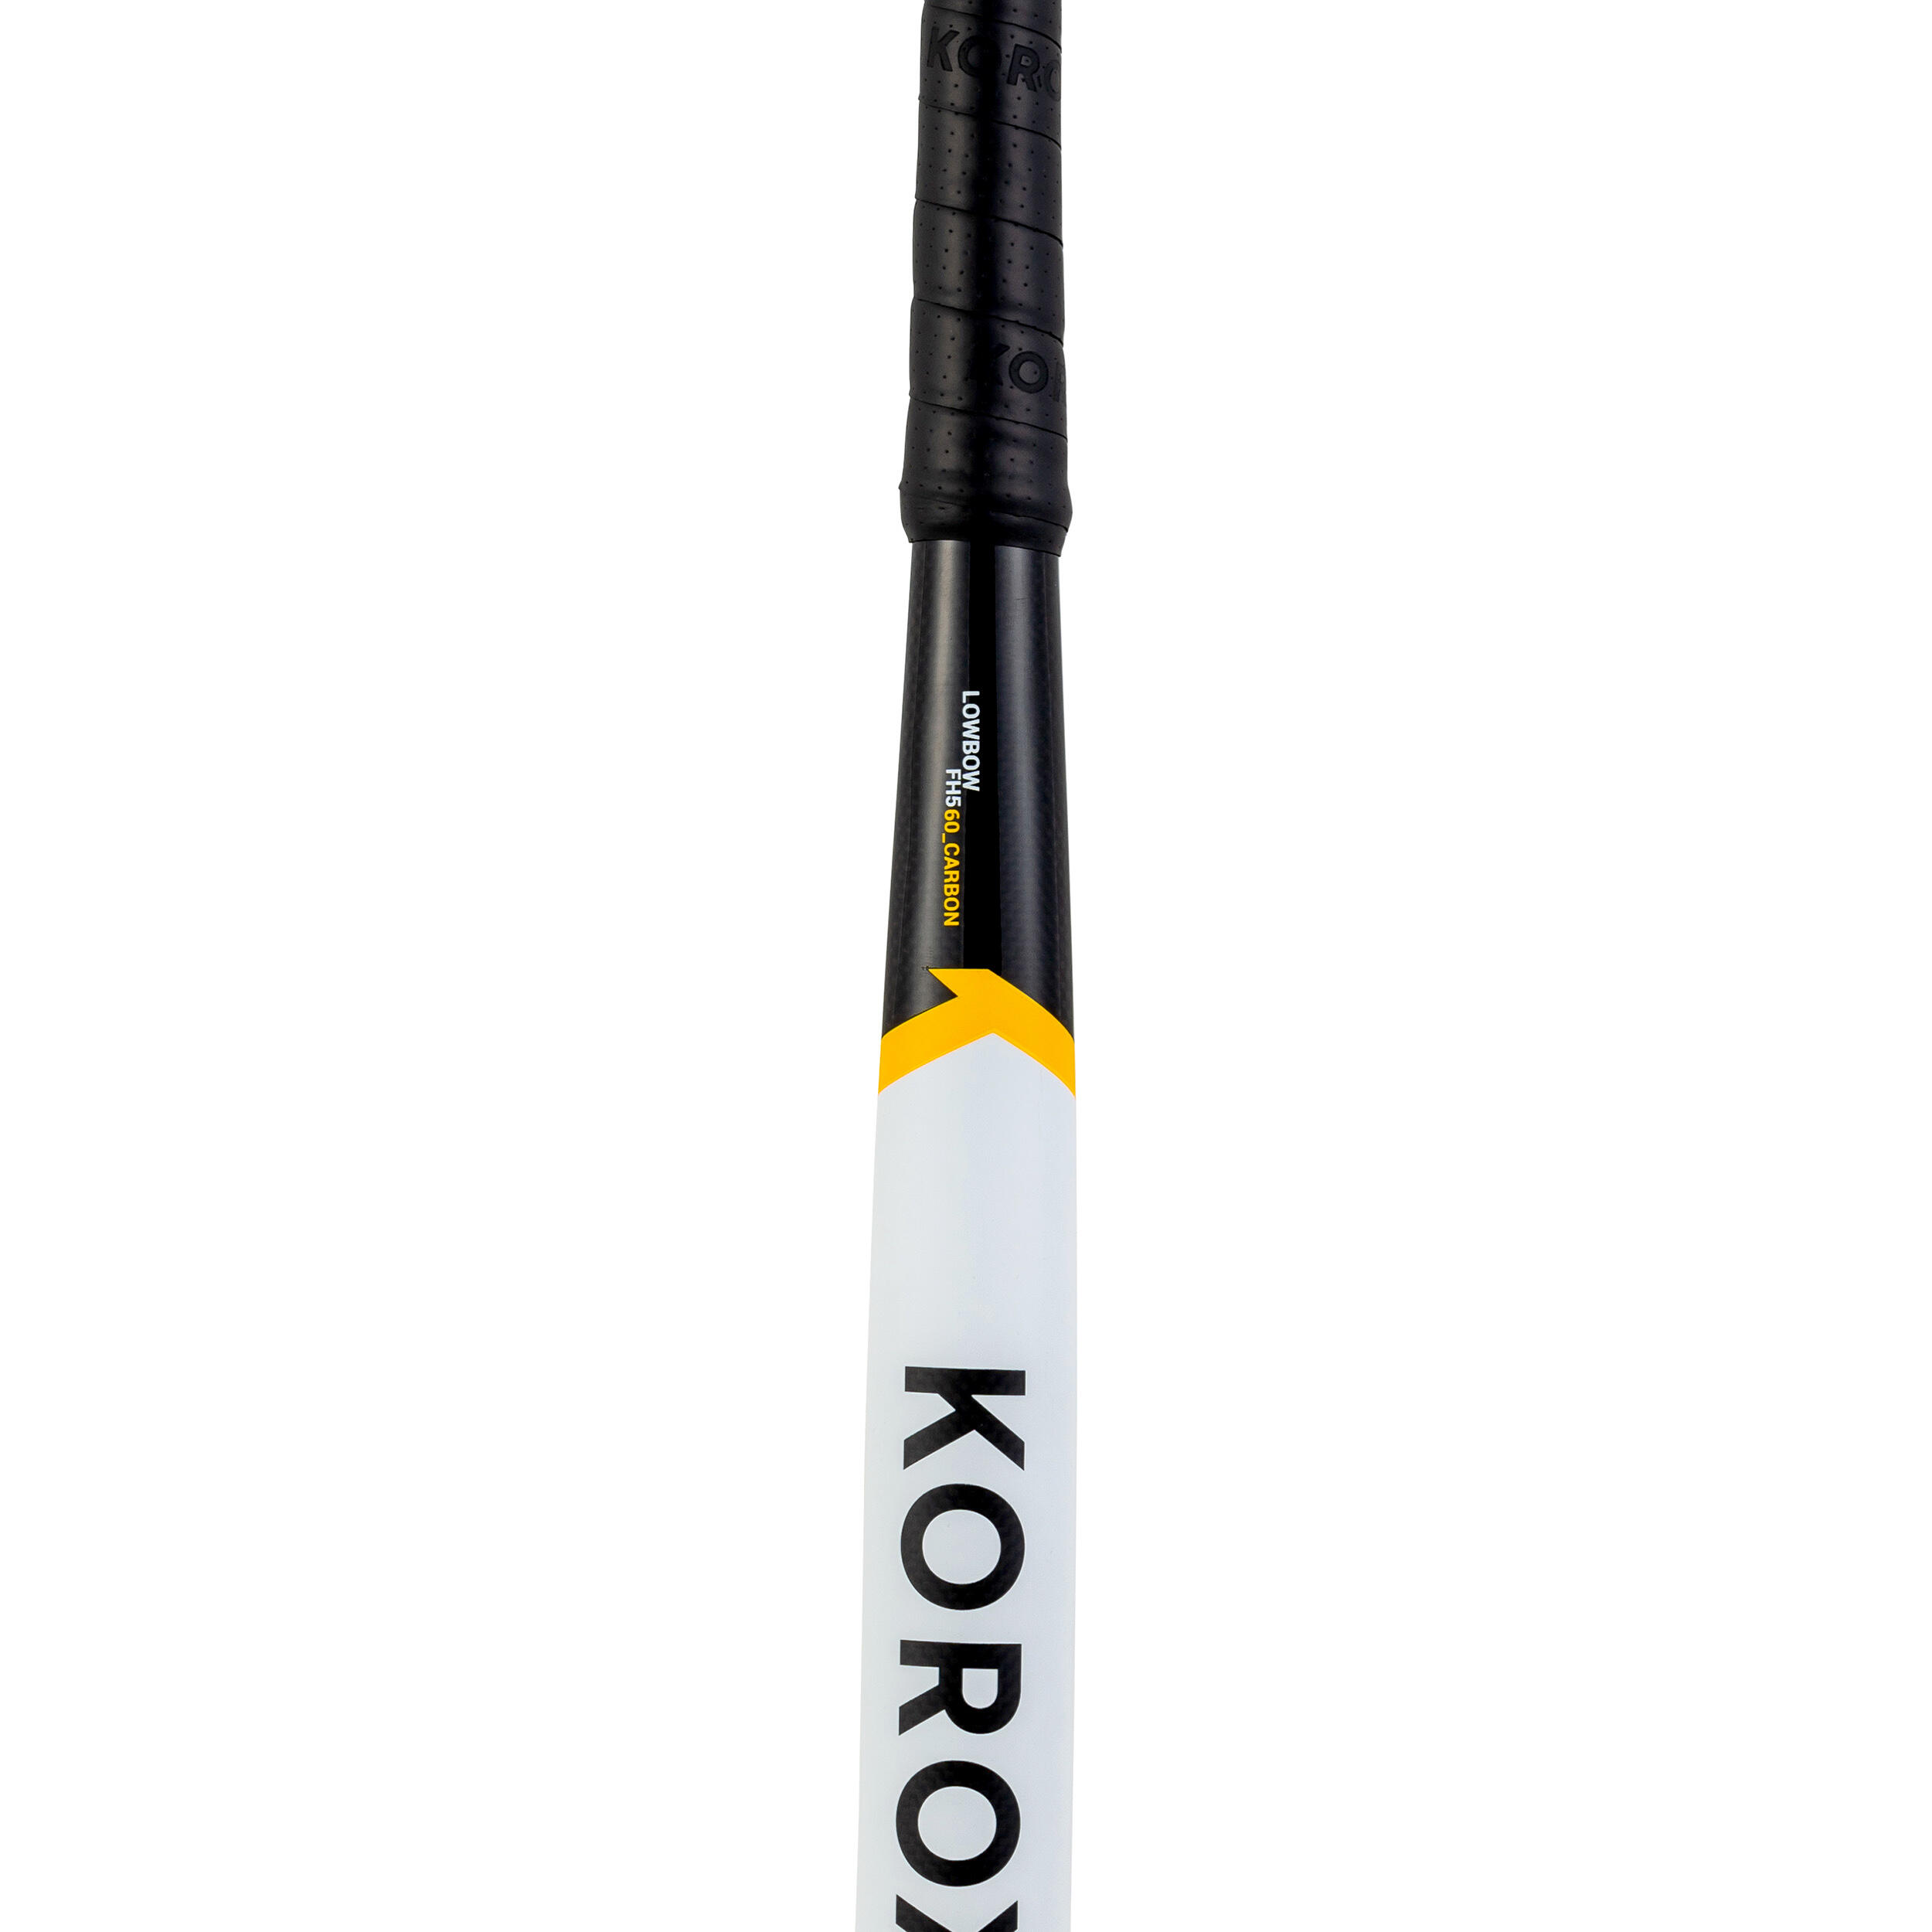 Adult Intermediate 60% Carbon Low Bow Field Hockey Stick FH560 - White/Yellow 12/12